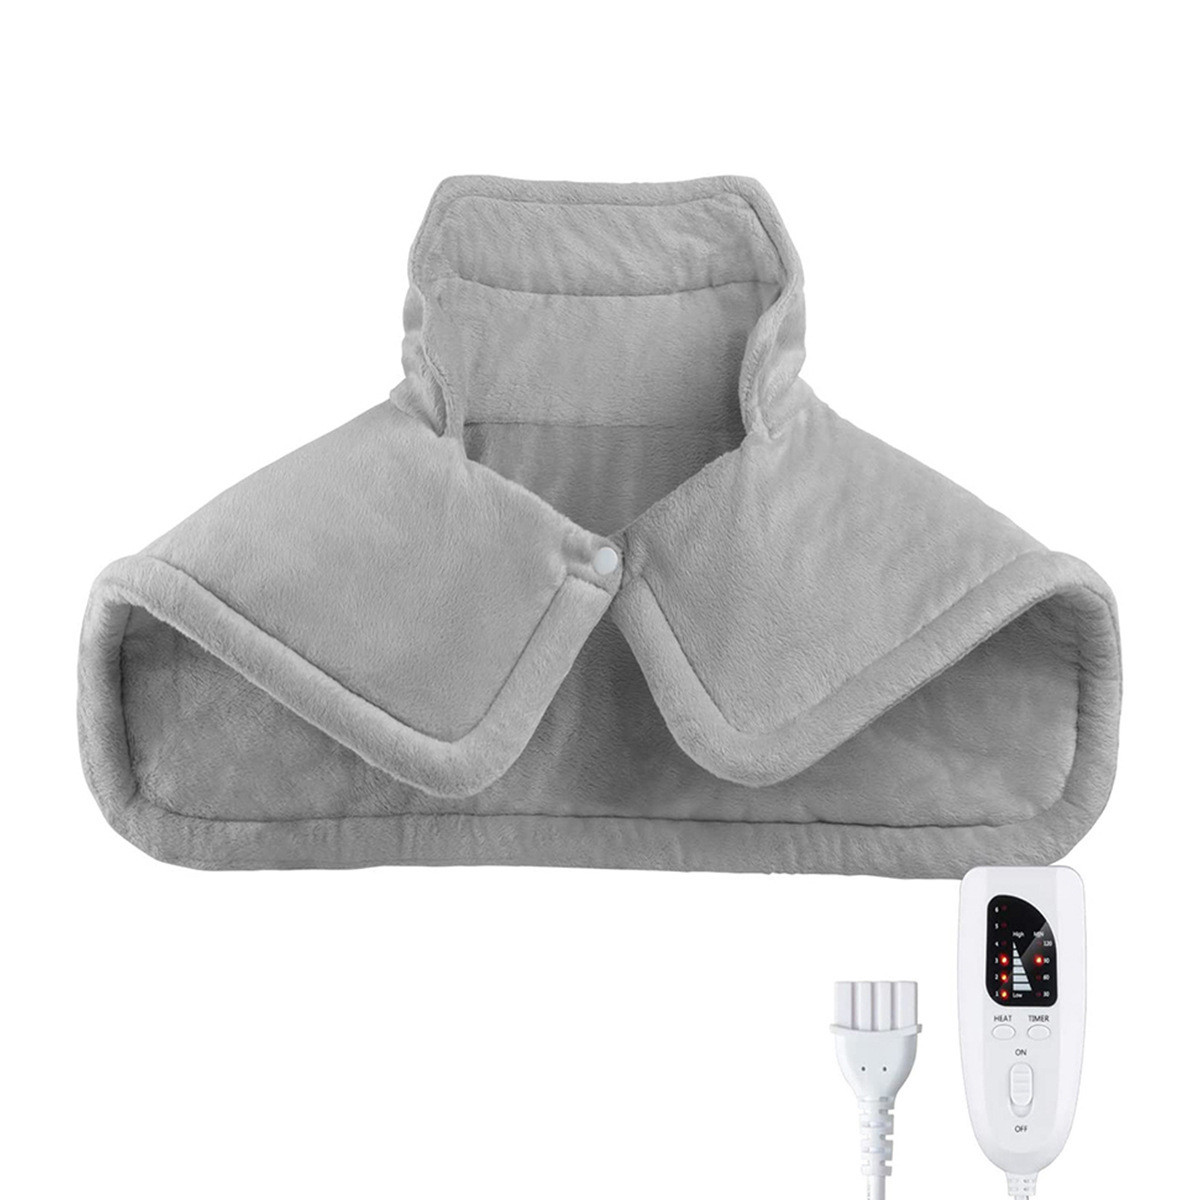 China Auto Shut Electric Heating Blankets For Neck And Shoulder Relief on sale